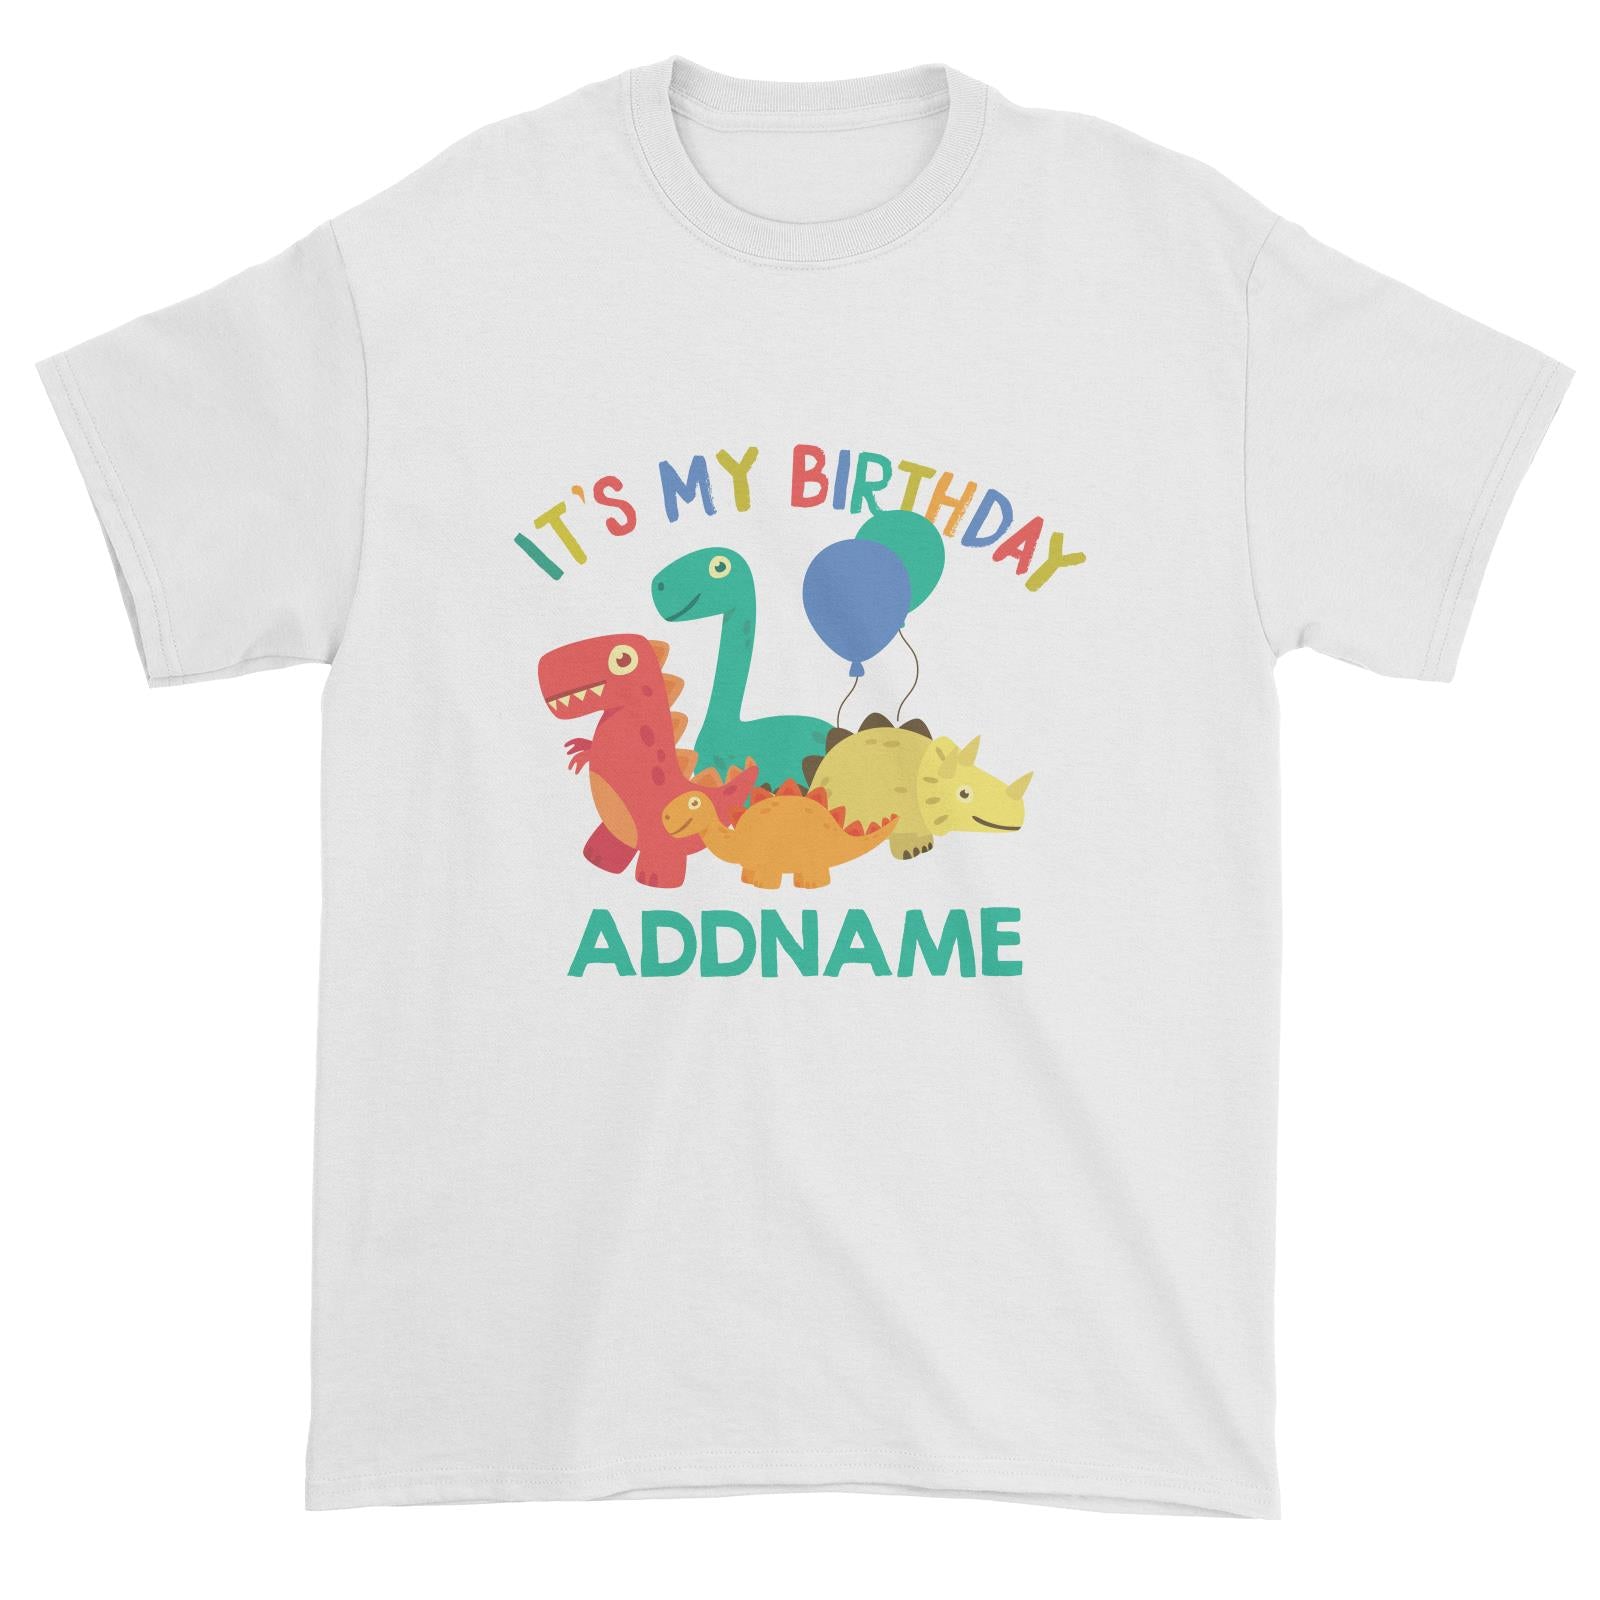 It's My Birthday Addname with Cute Dinosaurs and Balloons Birthday Theme Unisex T-Shirt